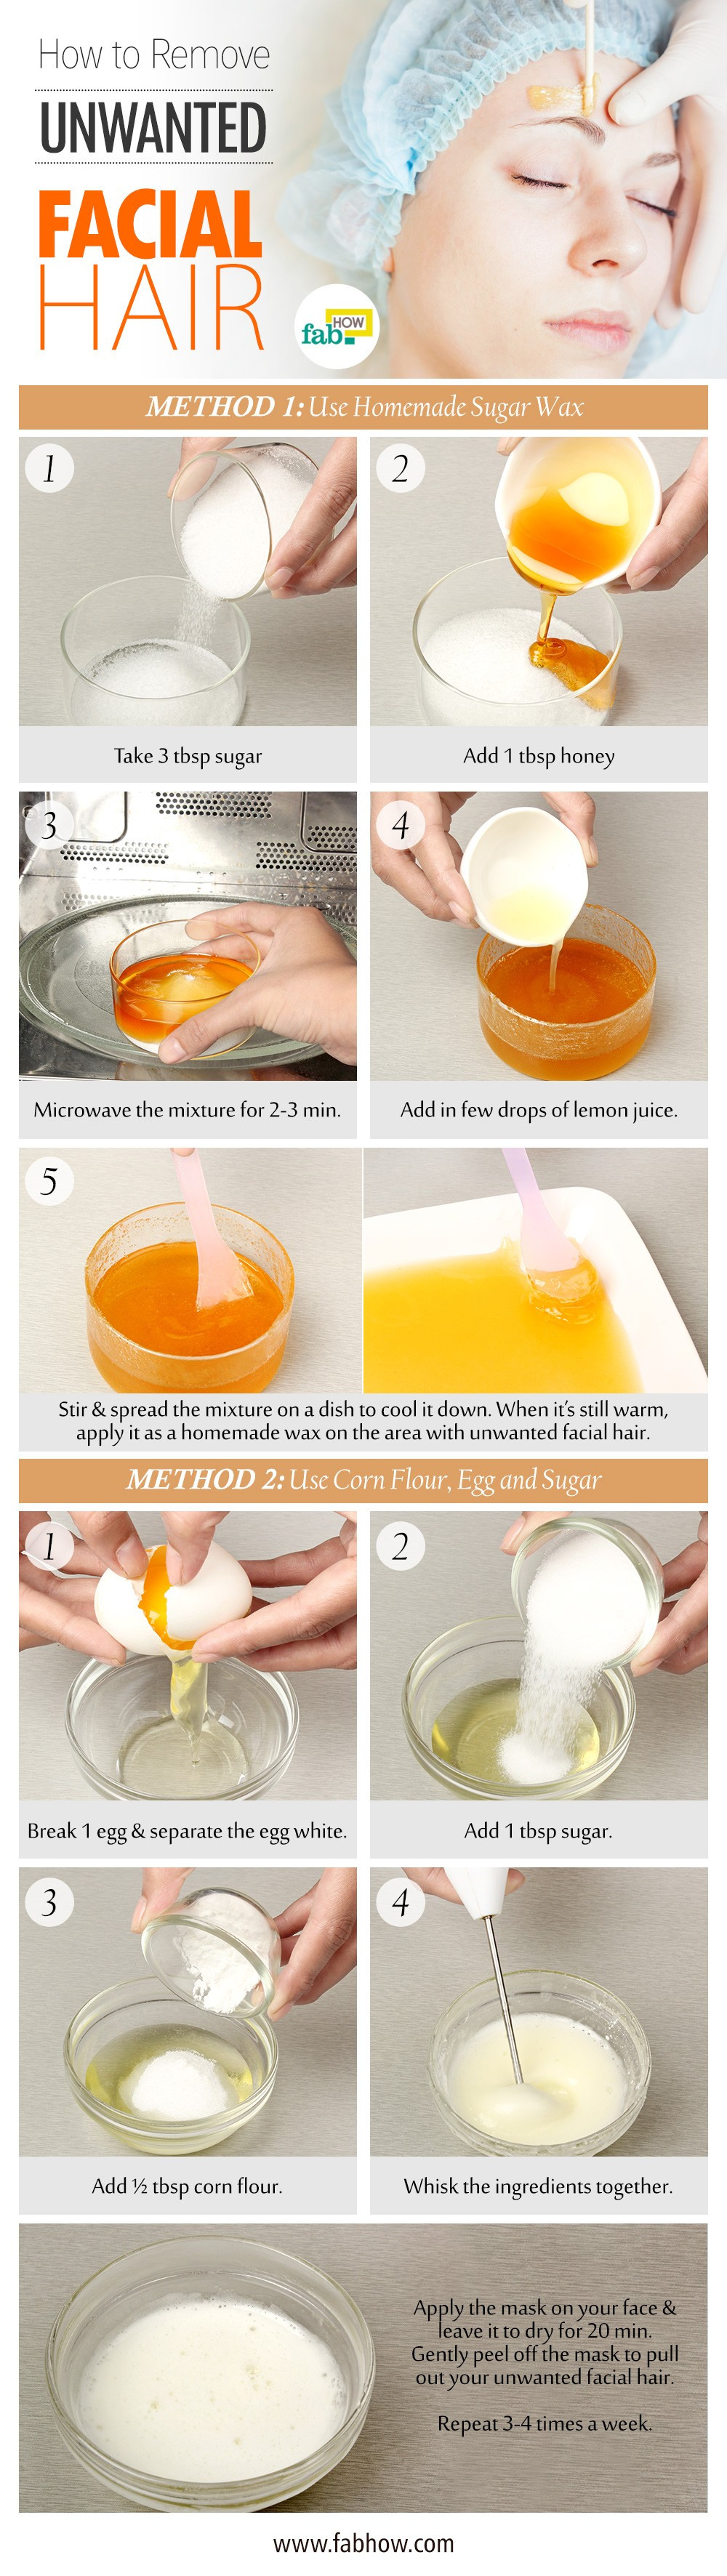 DIY Hair Removal Wax Without Lemon
 How To Make Homemade Wax Strips Without Lemon Juice